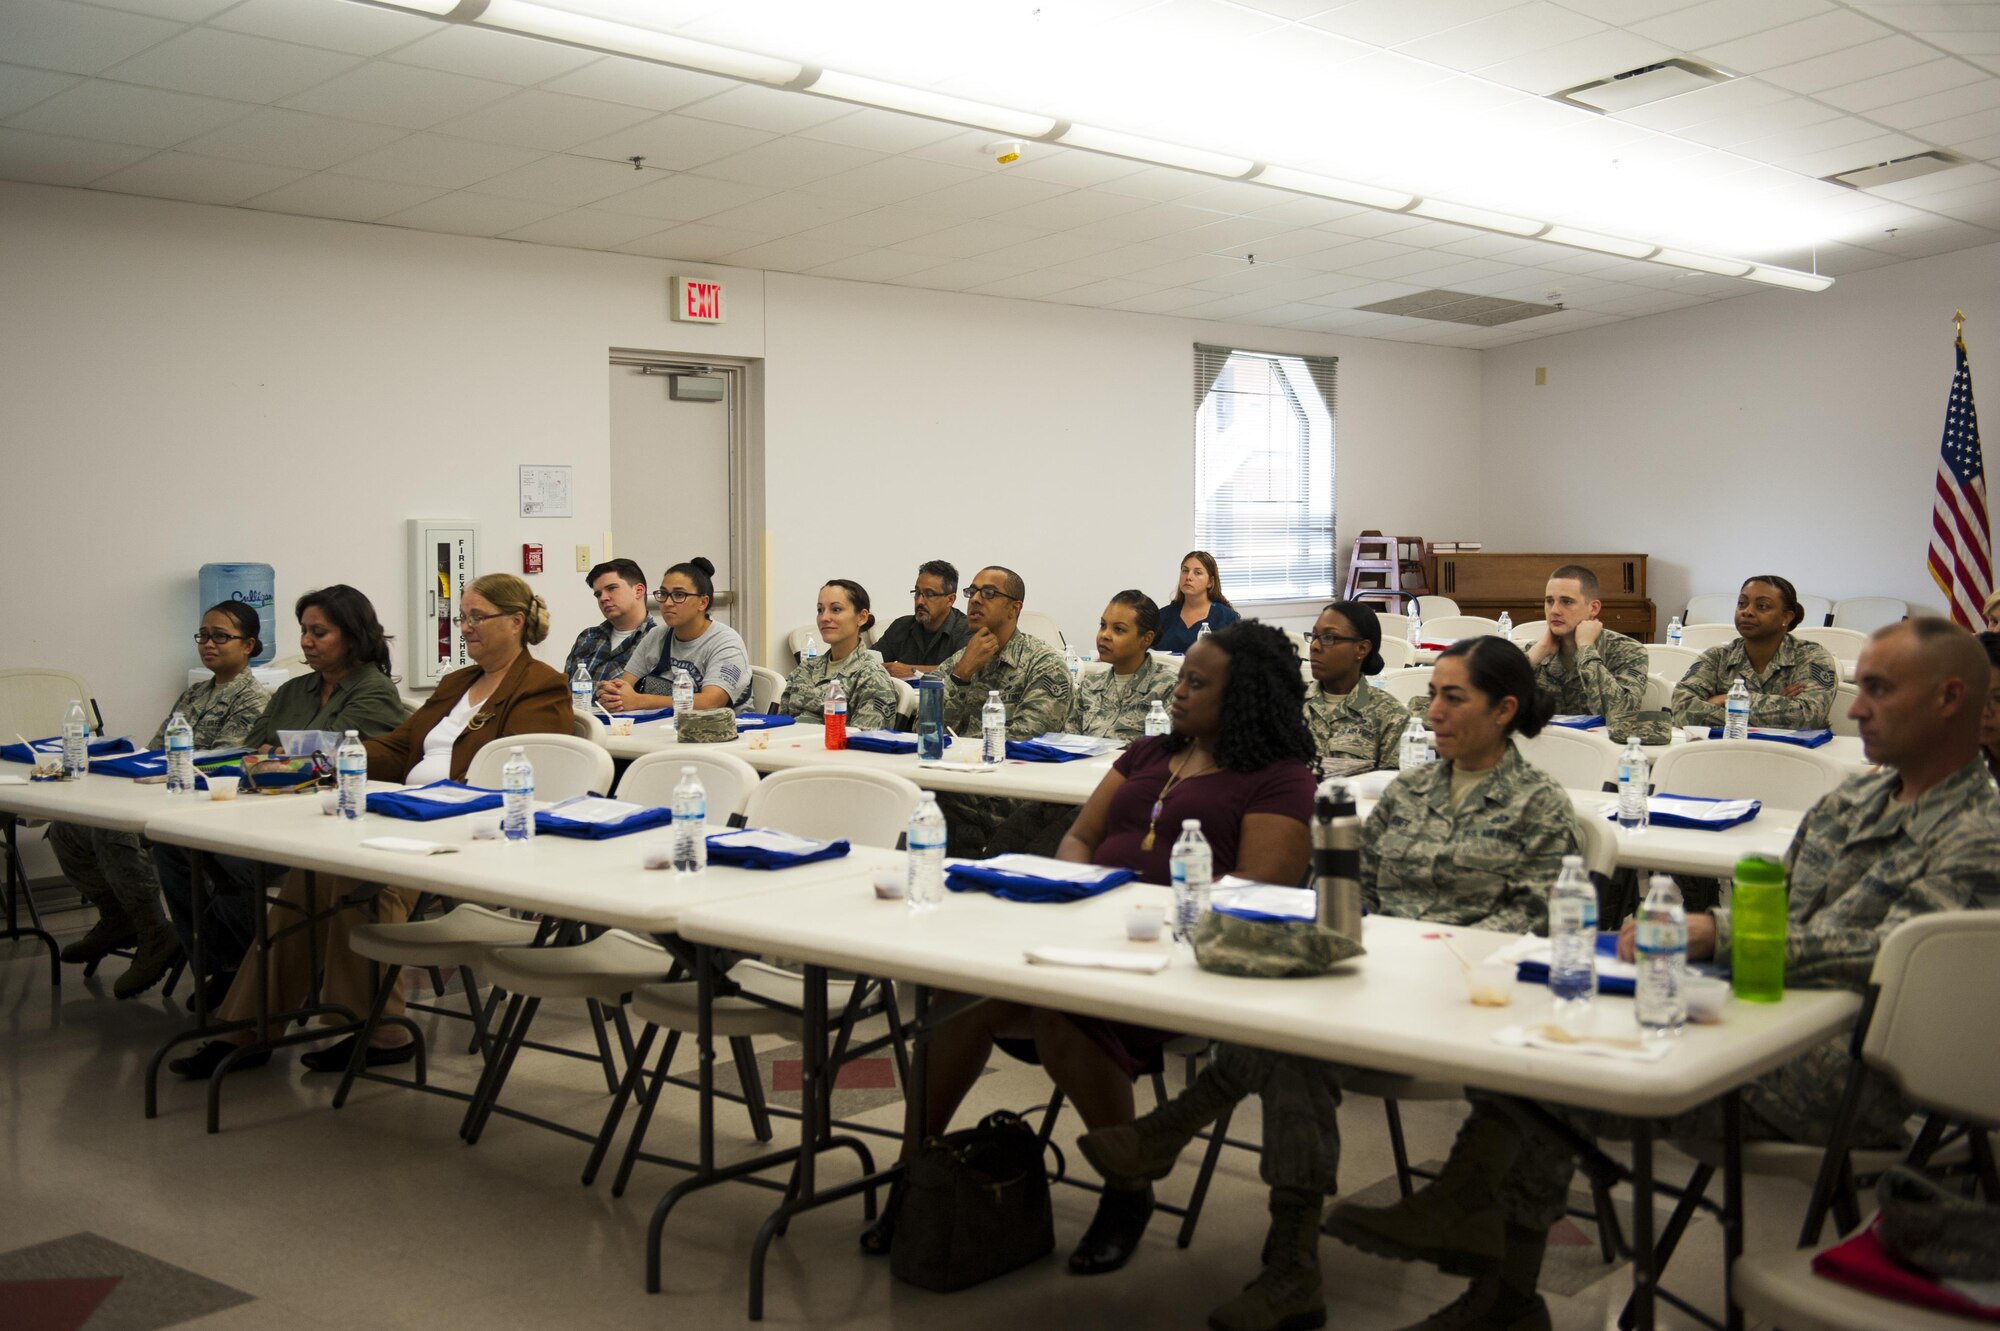 Members from all over Goodfellow attend a food demonstration hosted by the San Angelo Community Medical Center executive chef at the Taylor Chapel on Goodfellow Air Force Base, Texas, Sept. 26, 2017. The event stressed the ease of cooking healthily and managing time. (U.S. Air Force photo by Senior Airman Scott Jackson/Released)